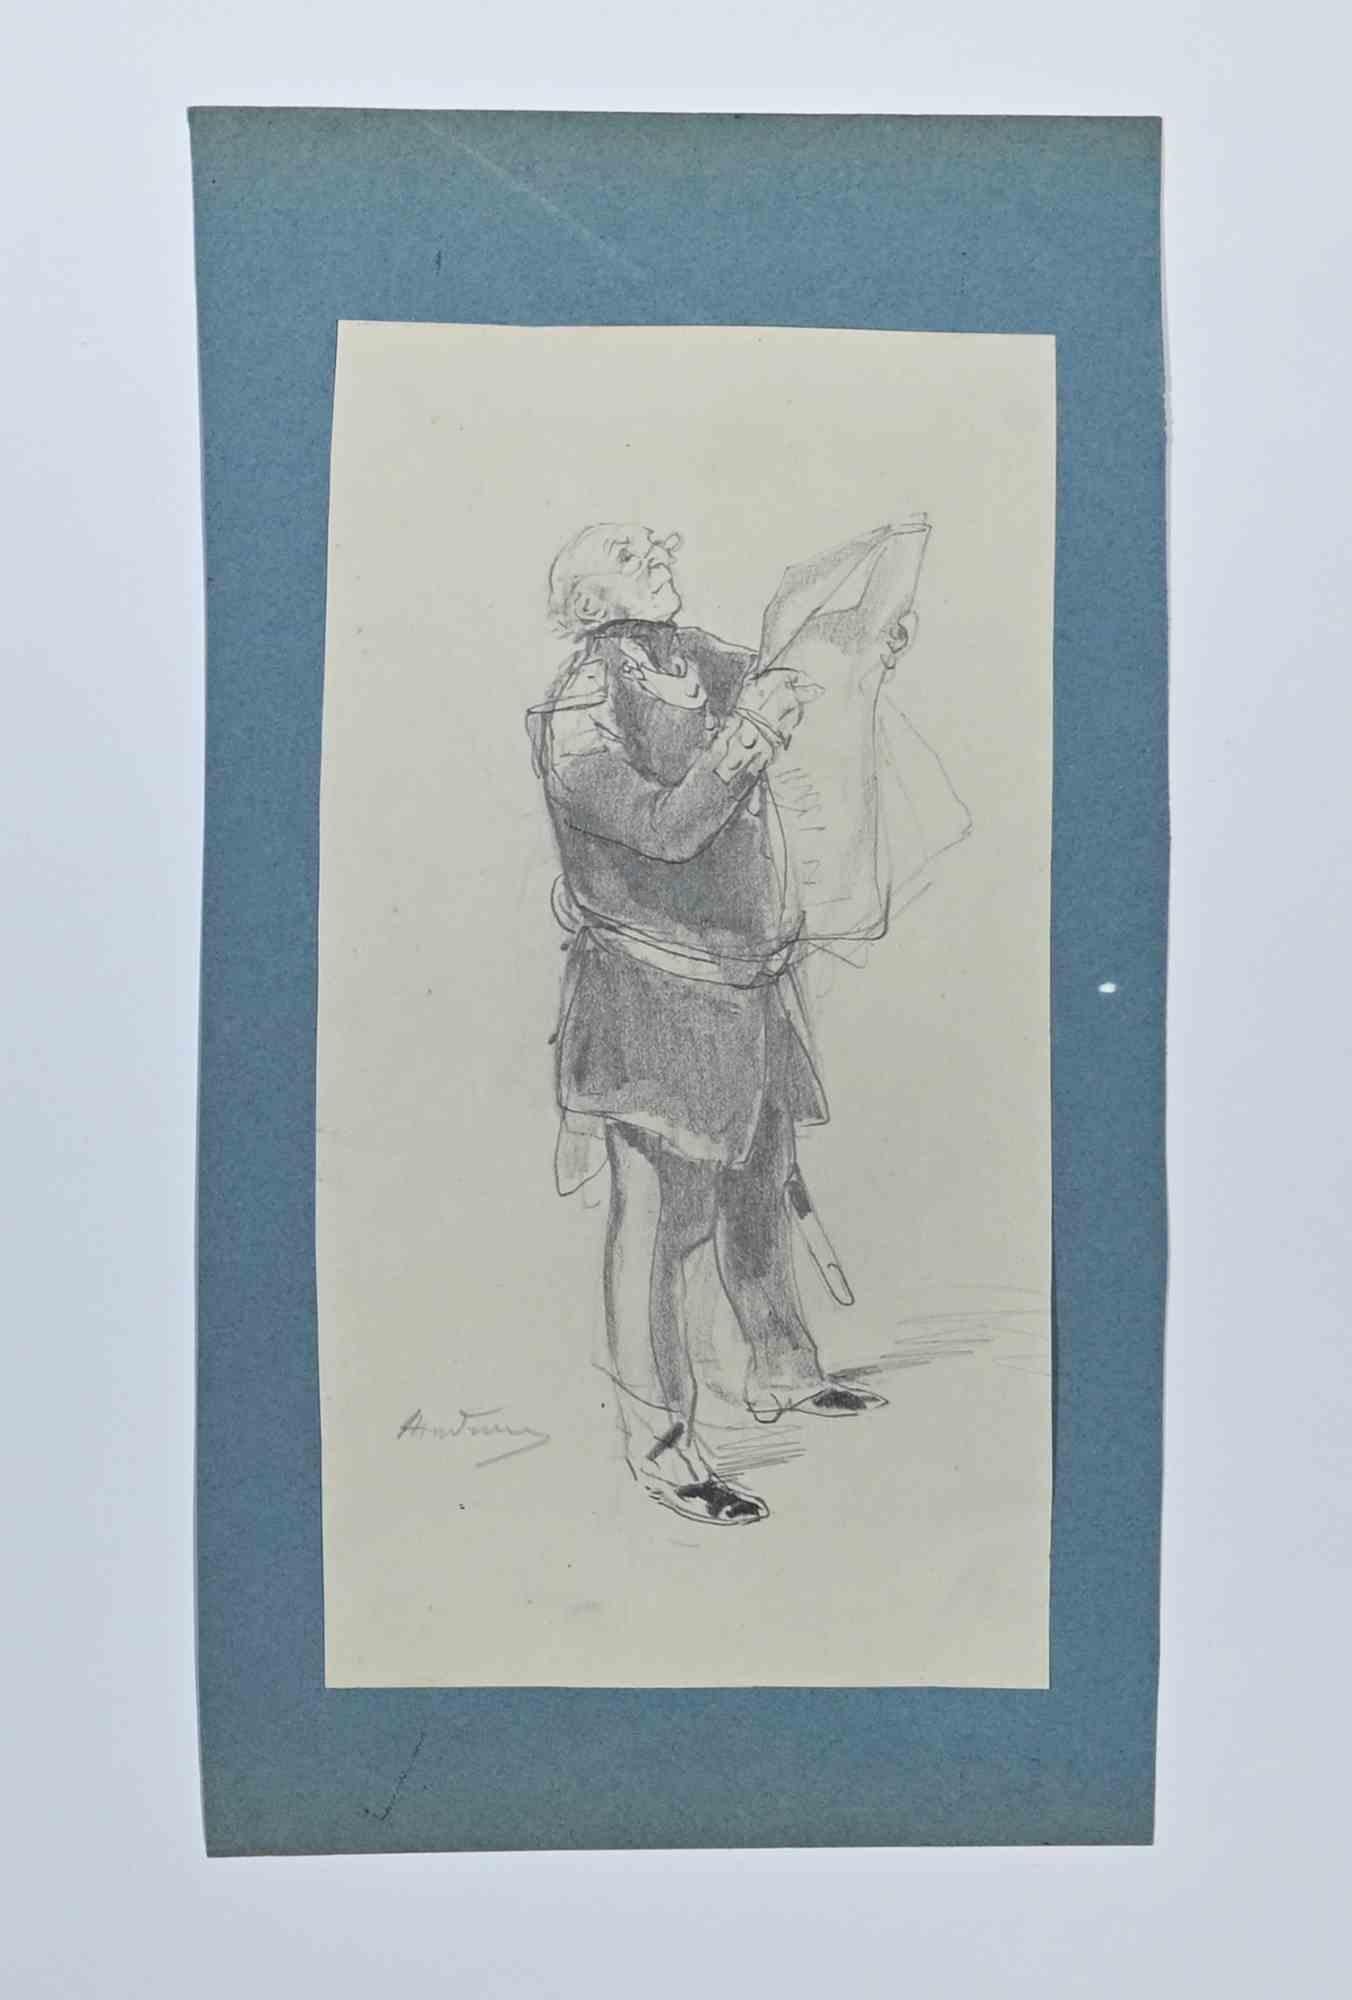 Man Reading - Original Pencil Drawing by Auguste Andrieux - 19th Century